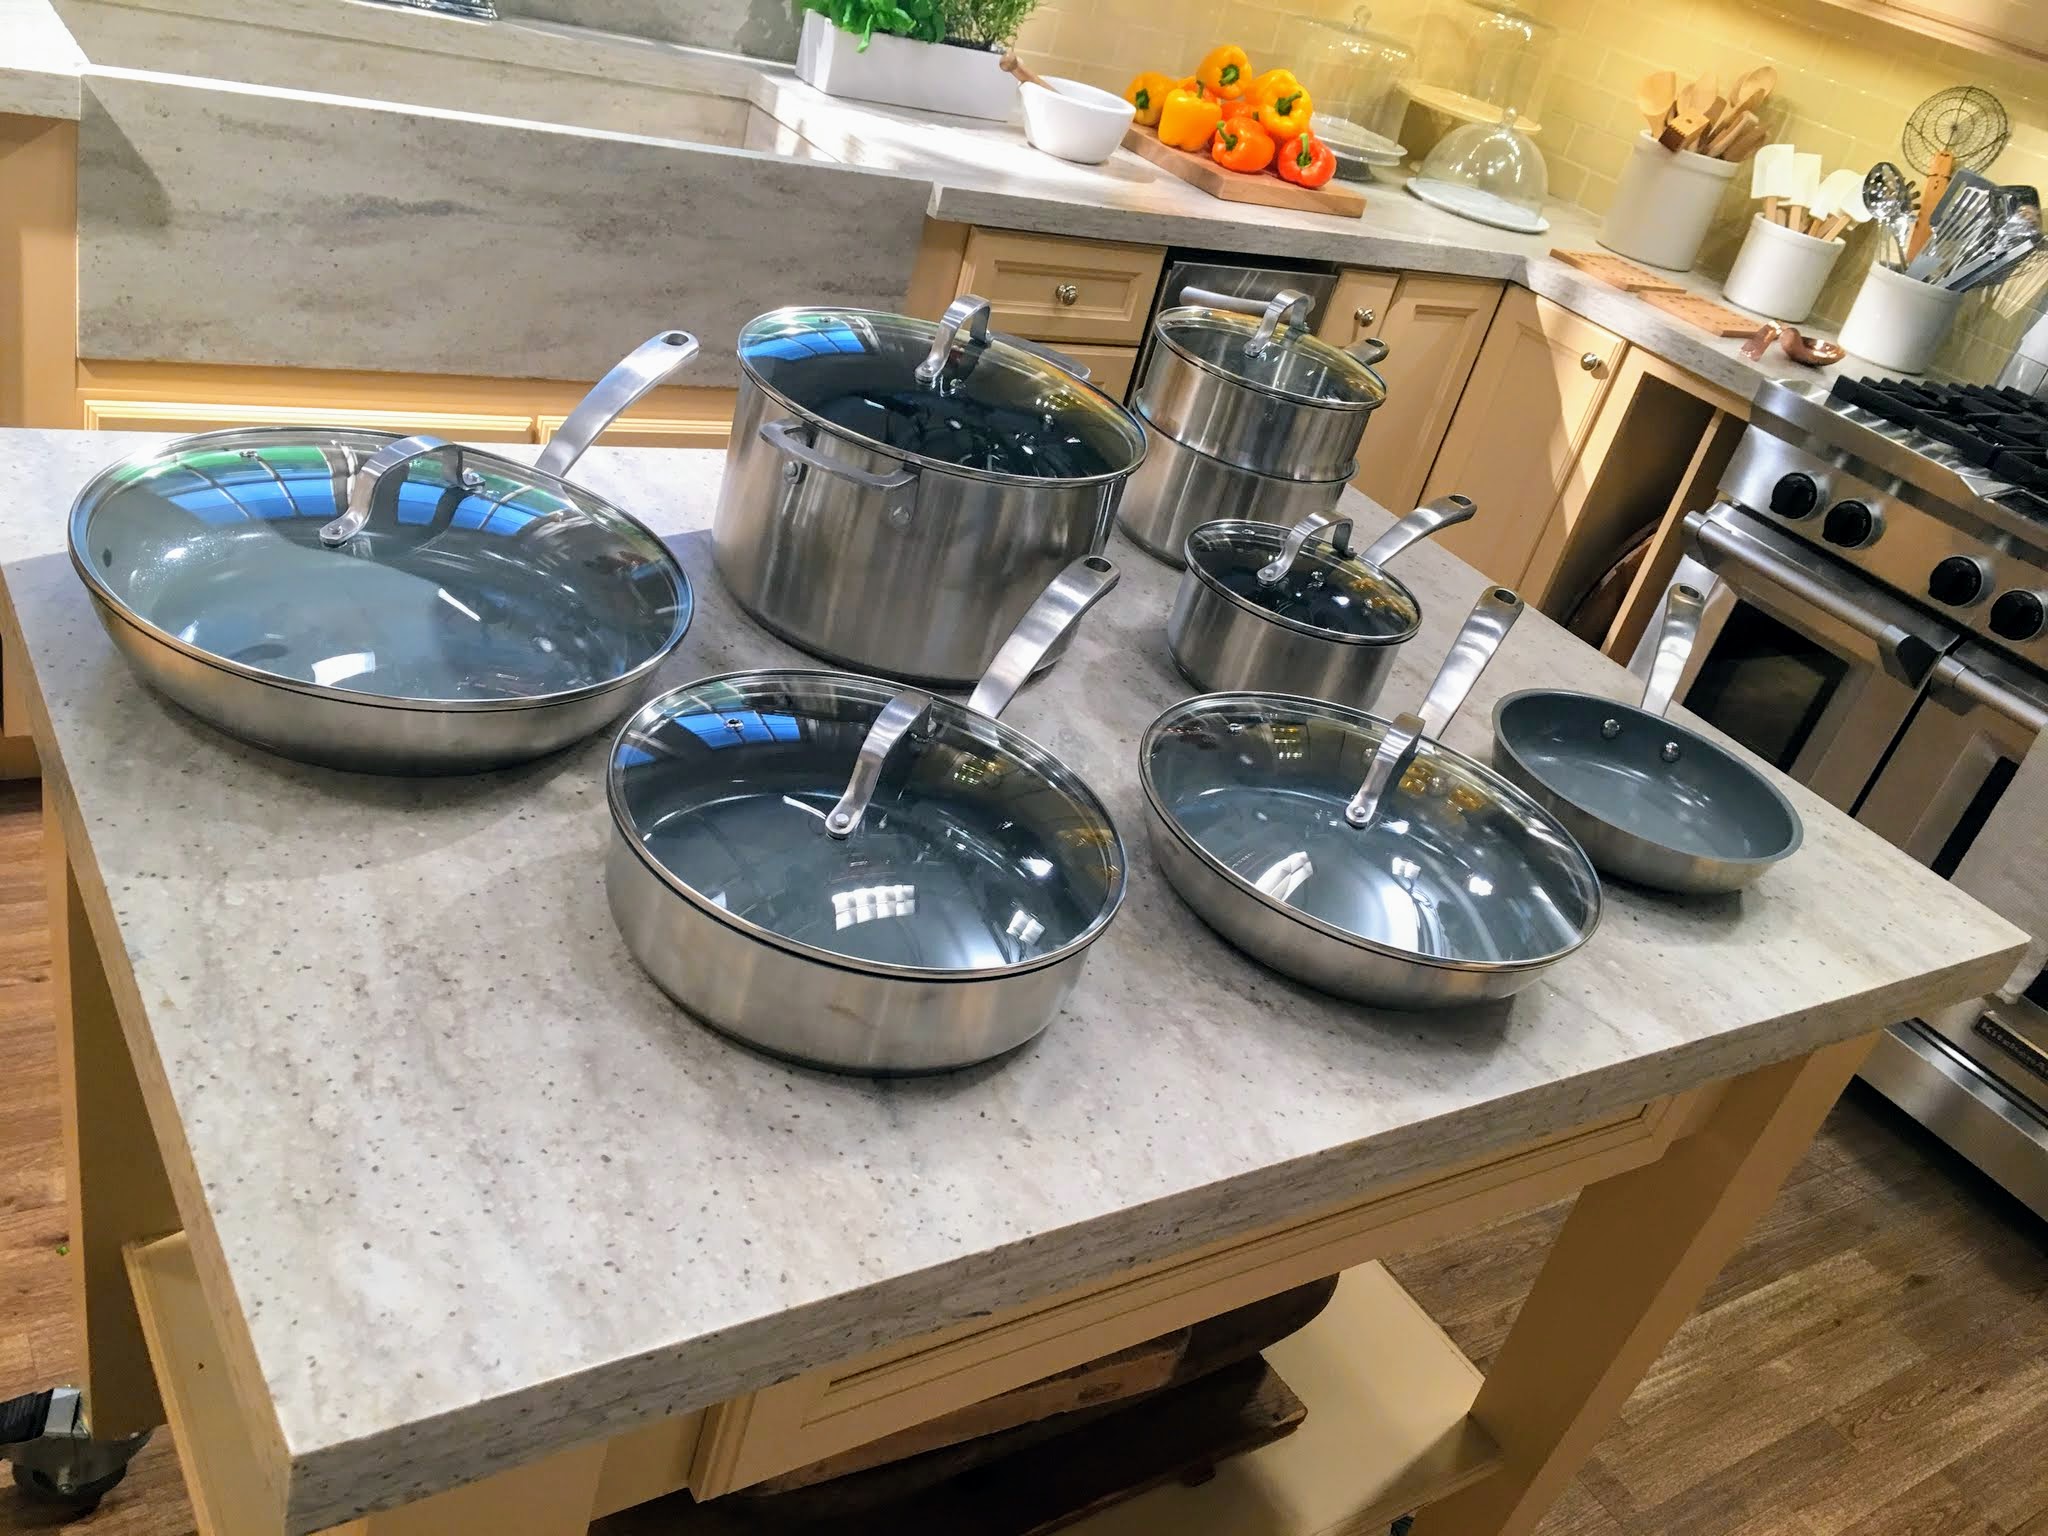 Martha Stewart Collection 14-Pc. Cookware Set, Created for Macy's - Macy's